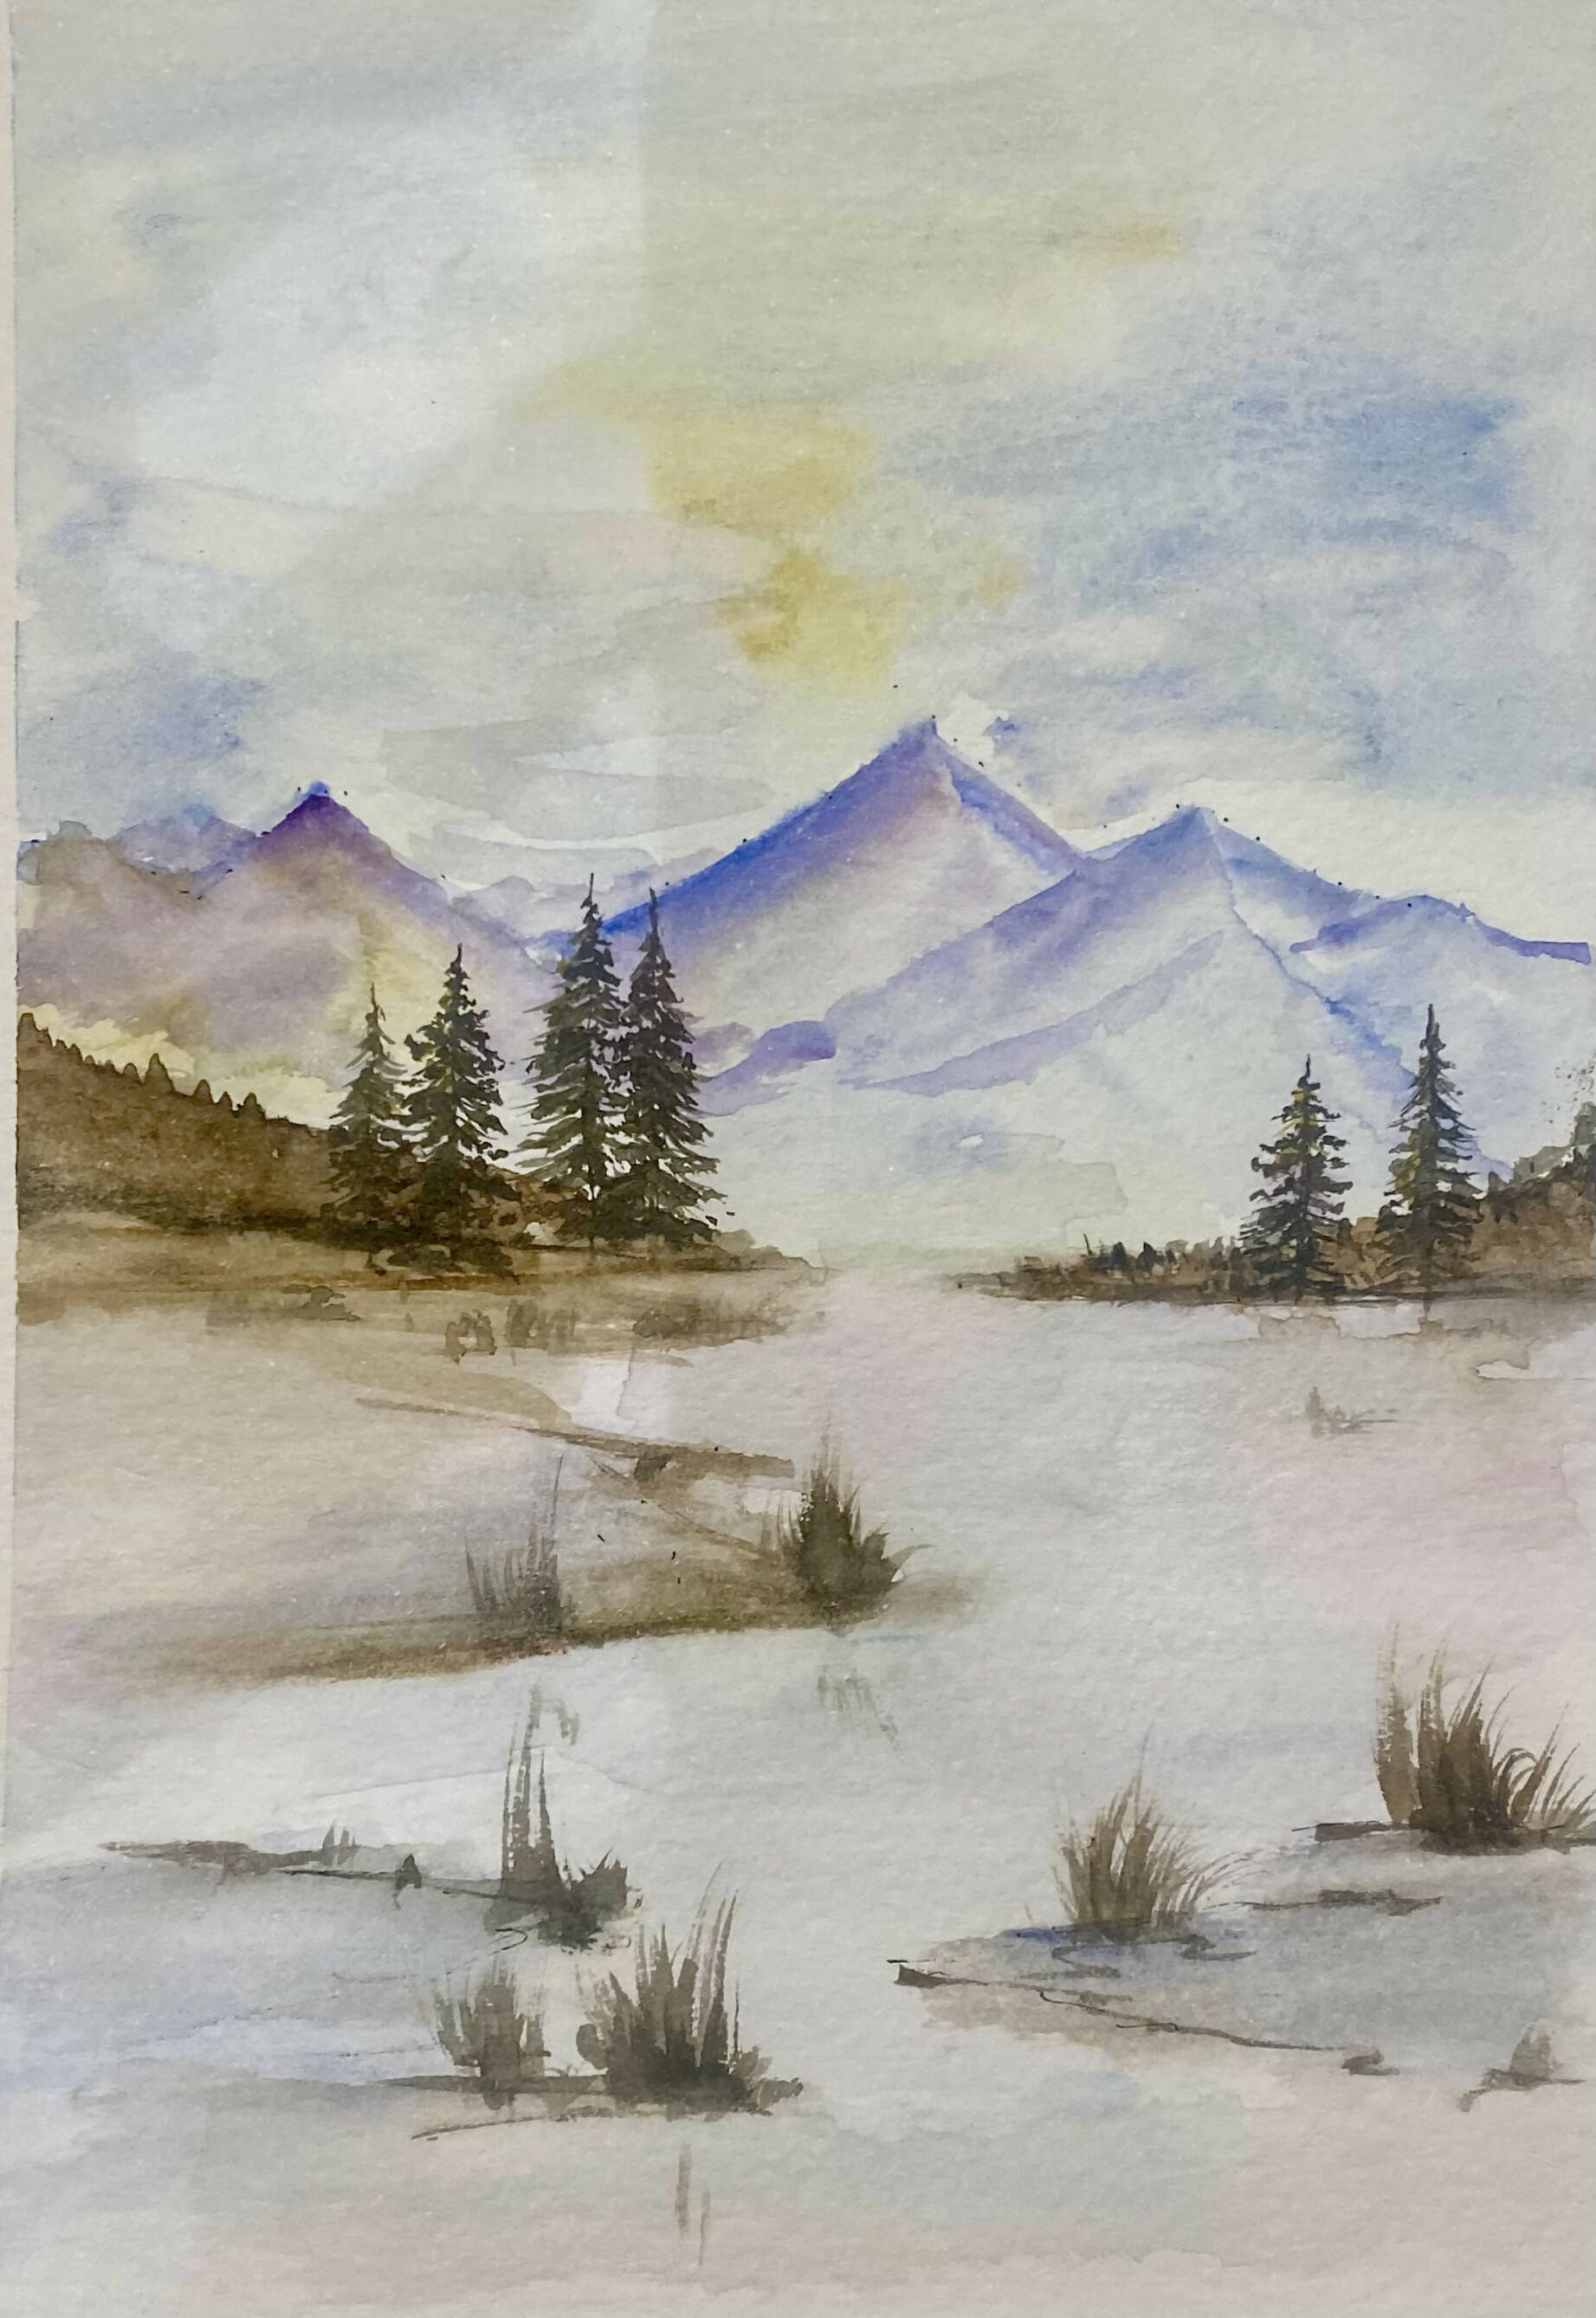 Healing landscape, the snowy mountains